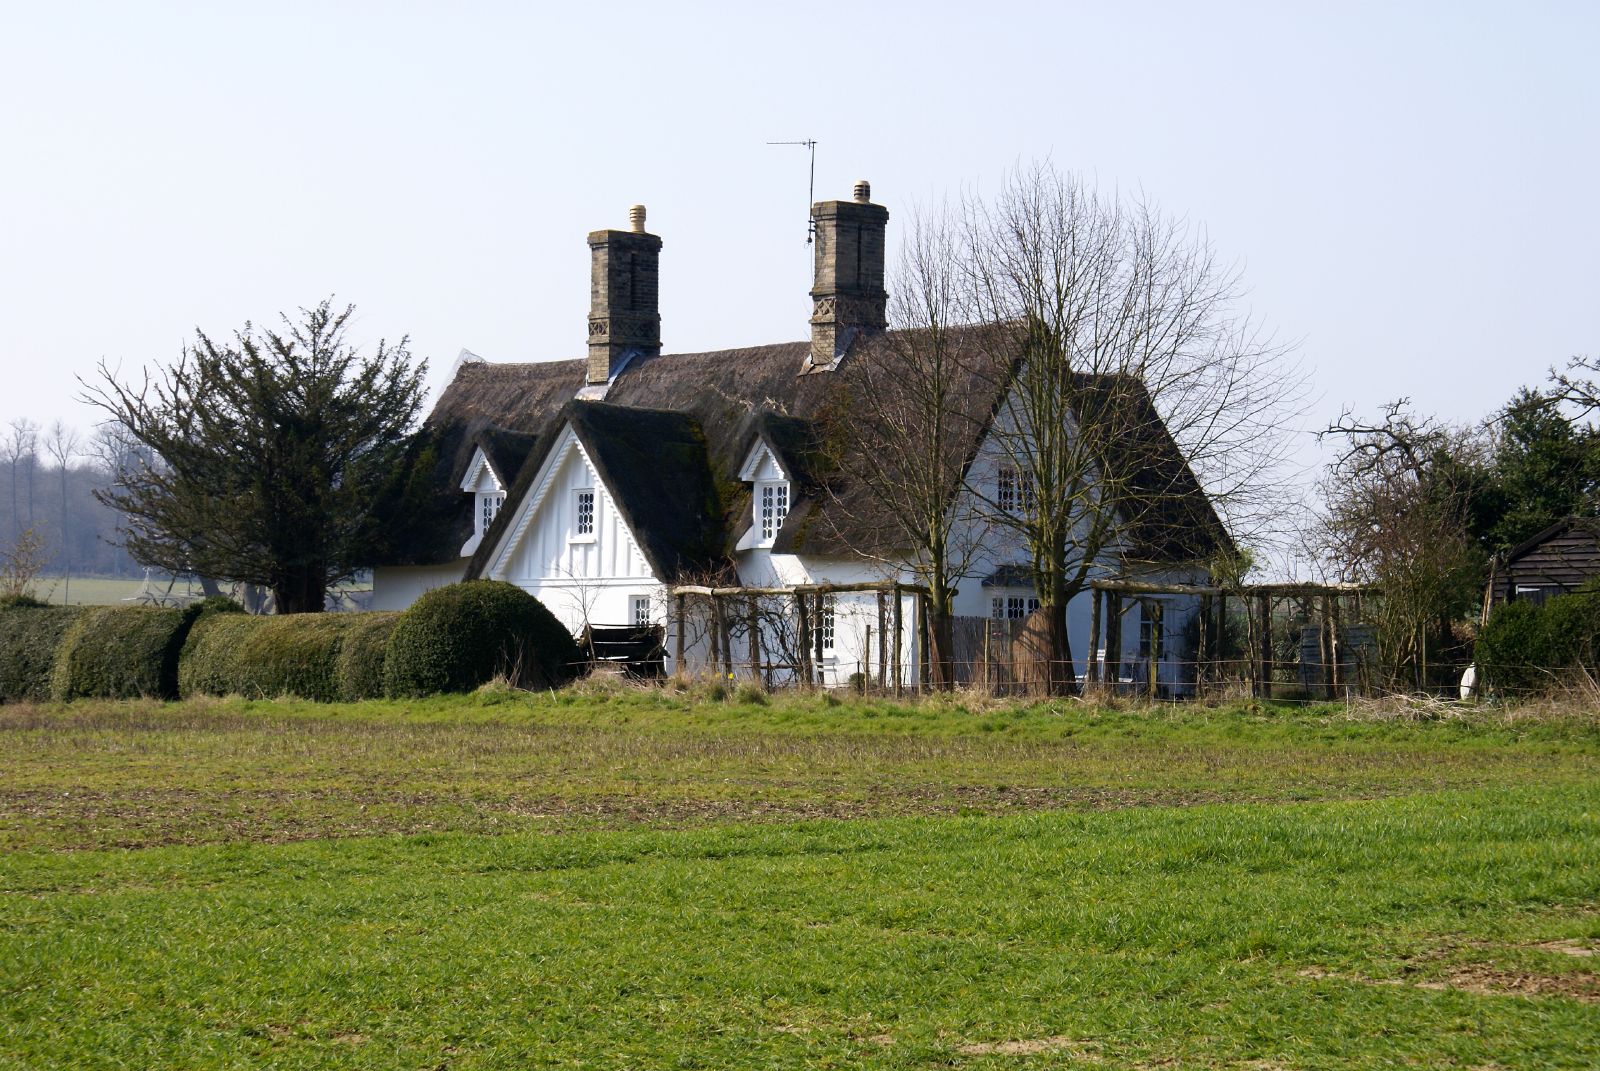 an old white farm house is situated near some trees